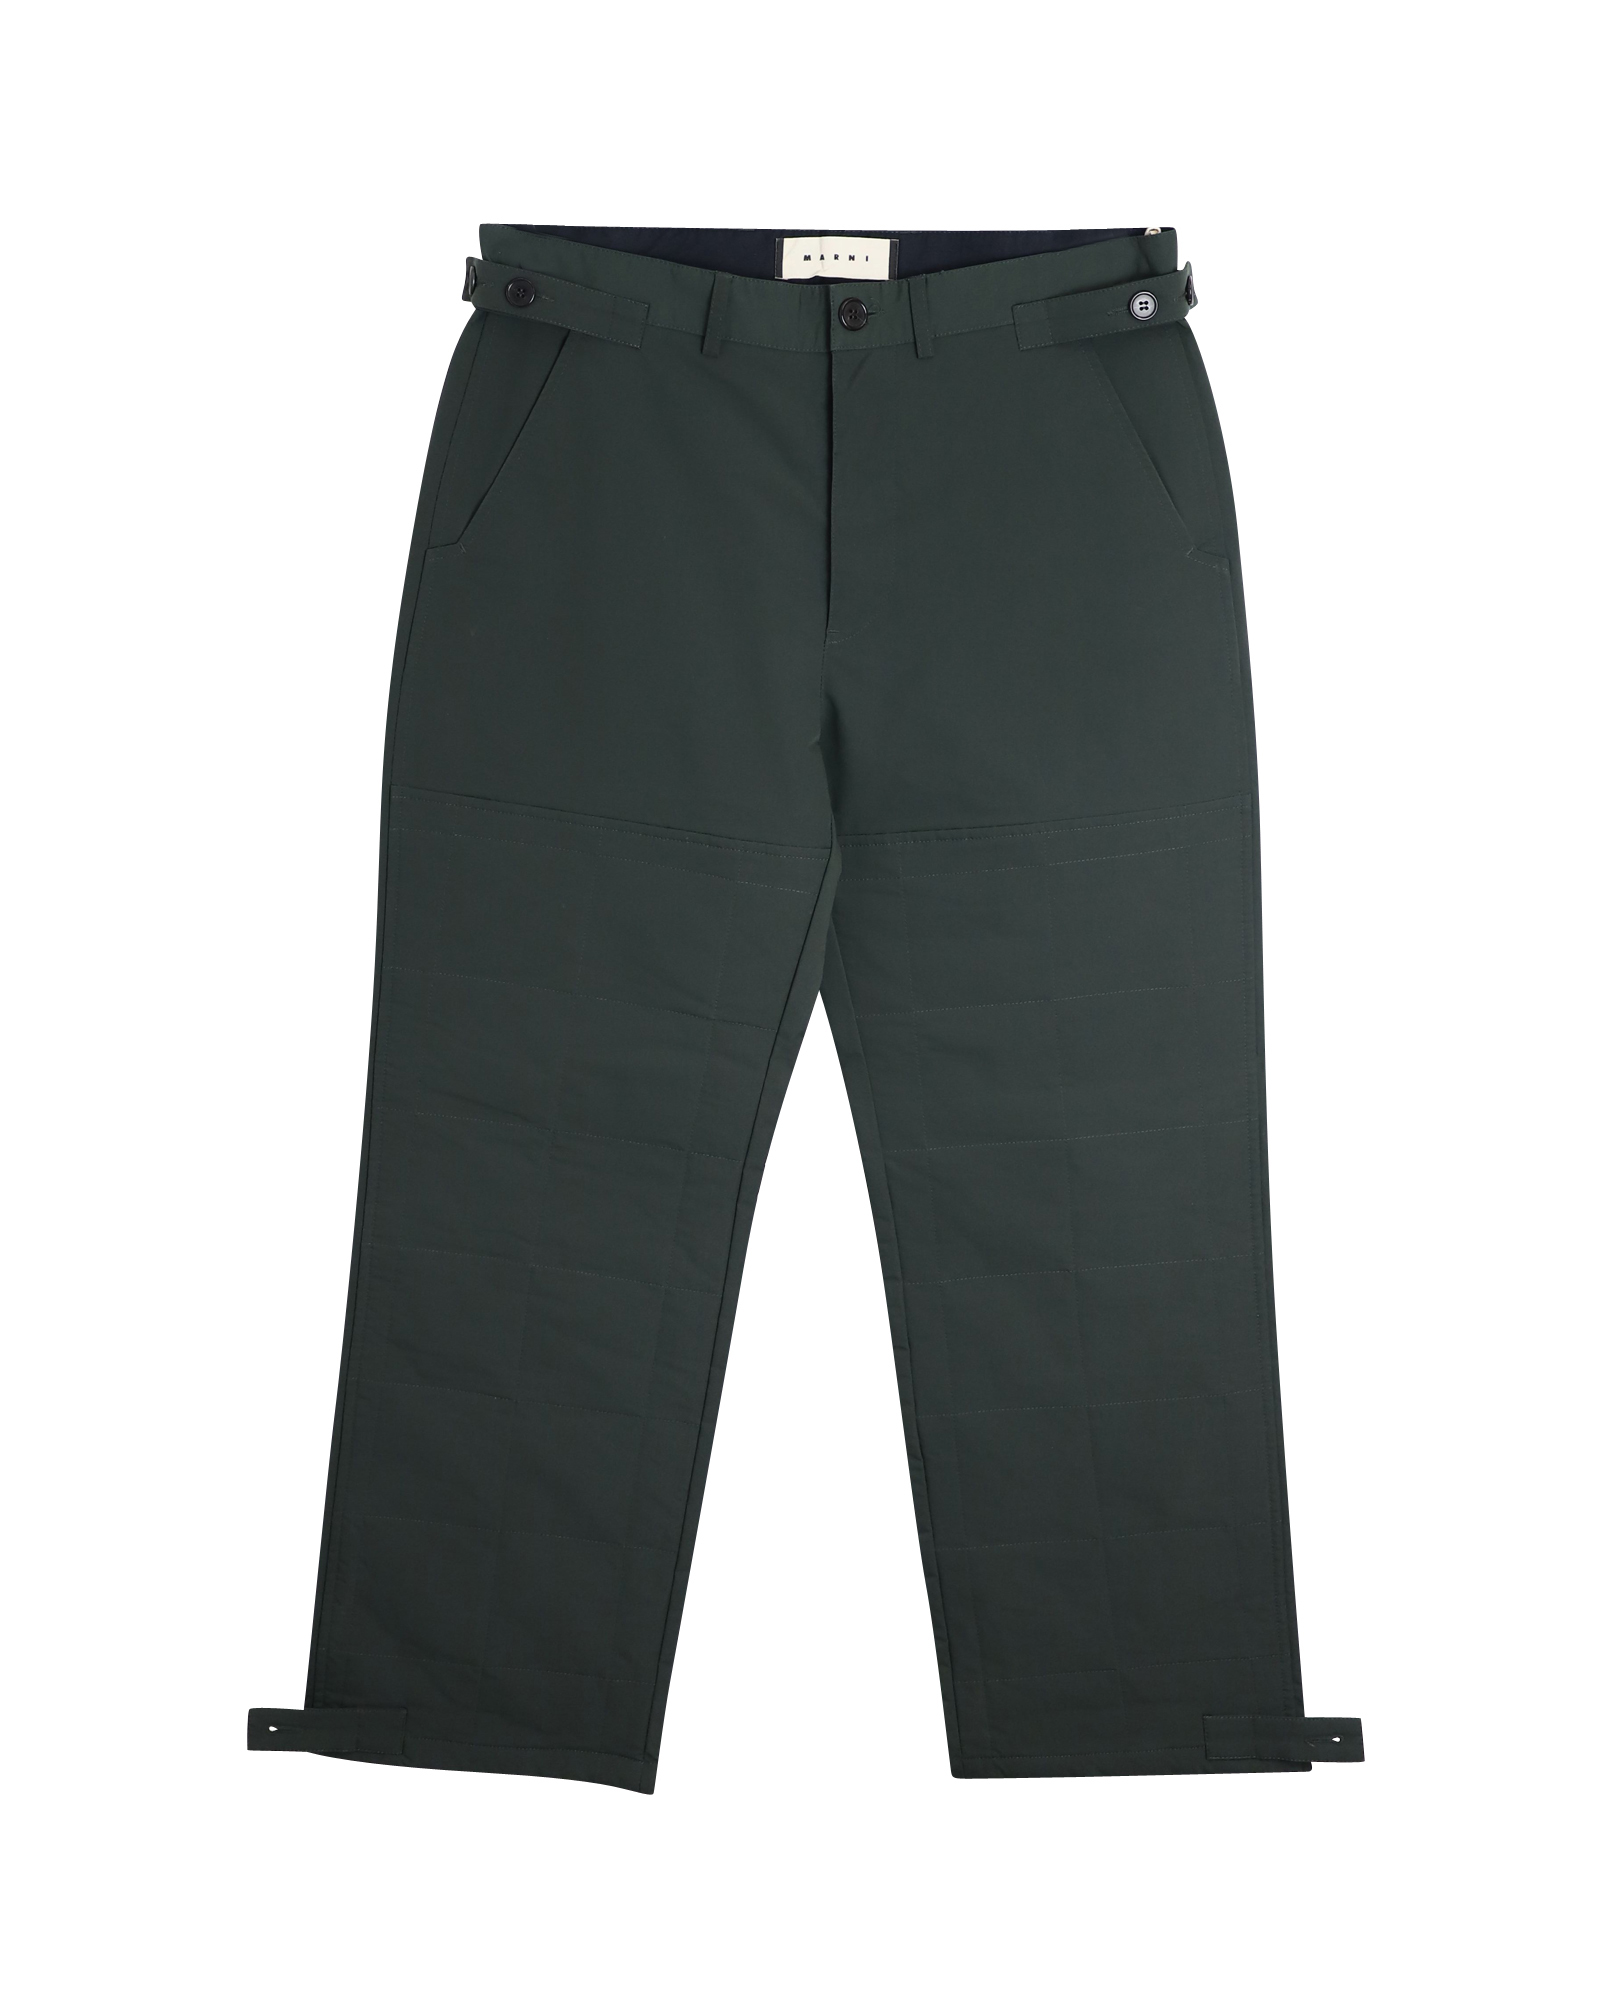 Relaxed Dark Green Trousers with Elegant Style